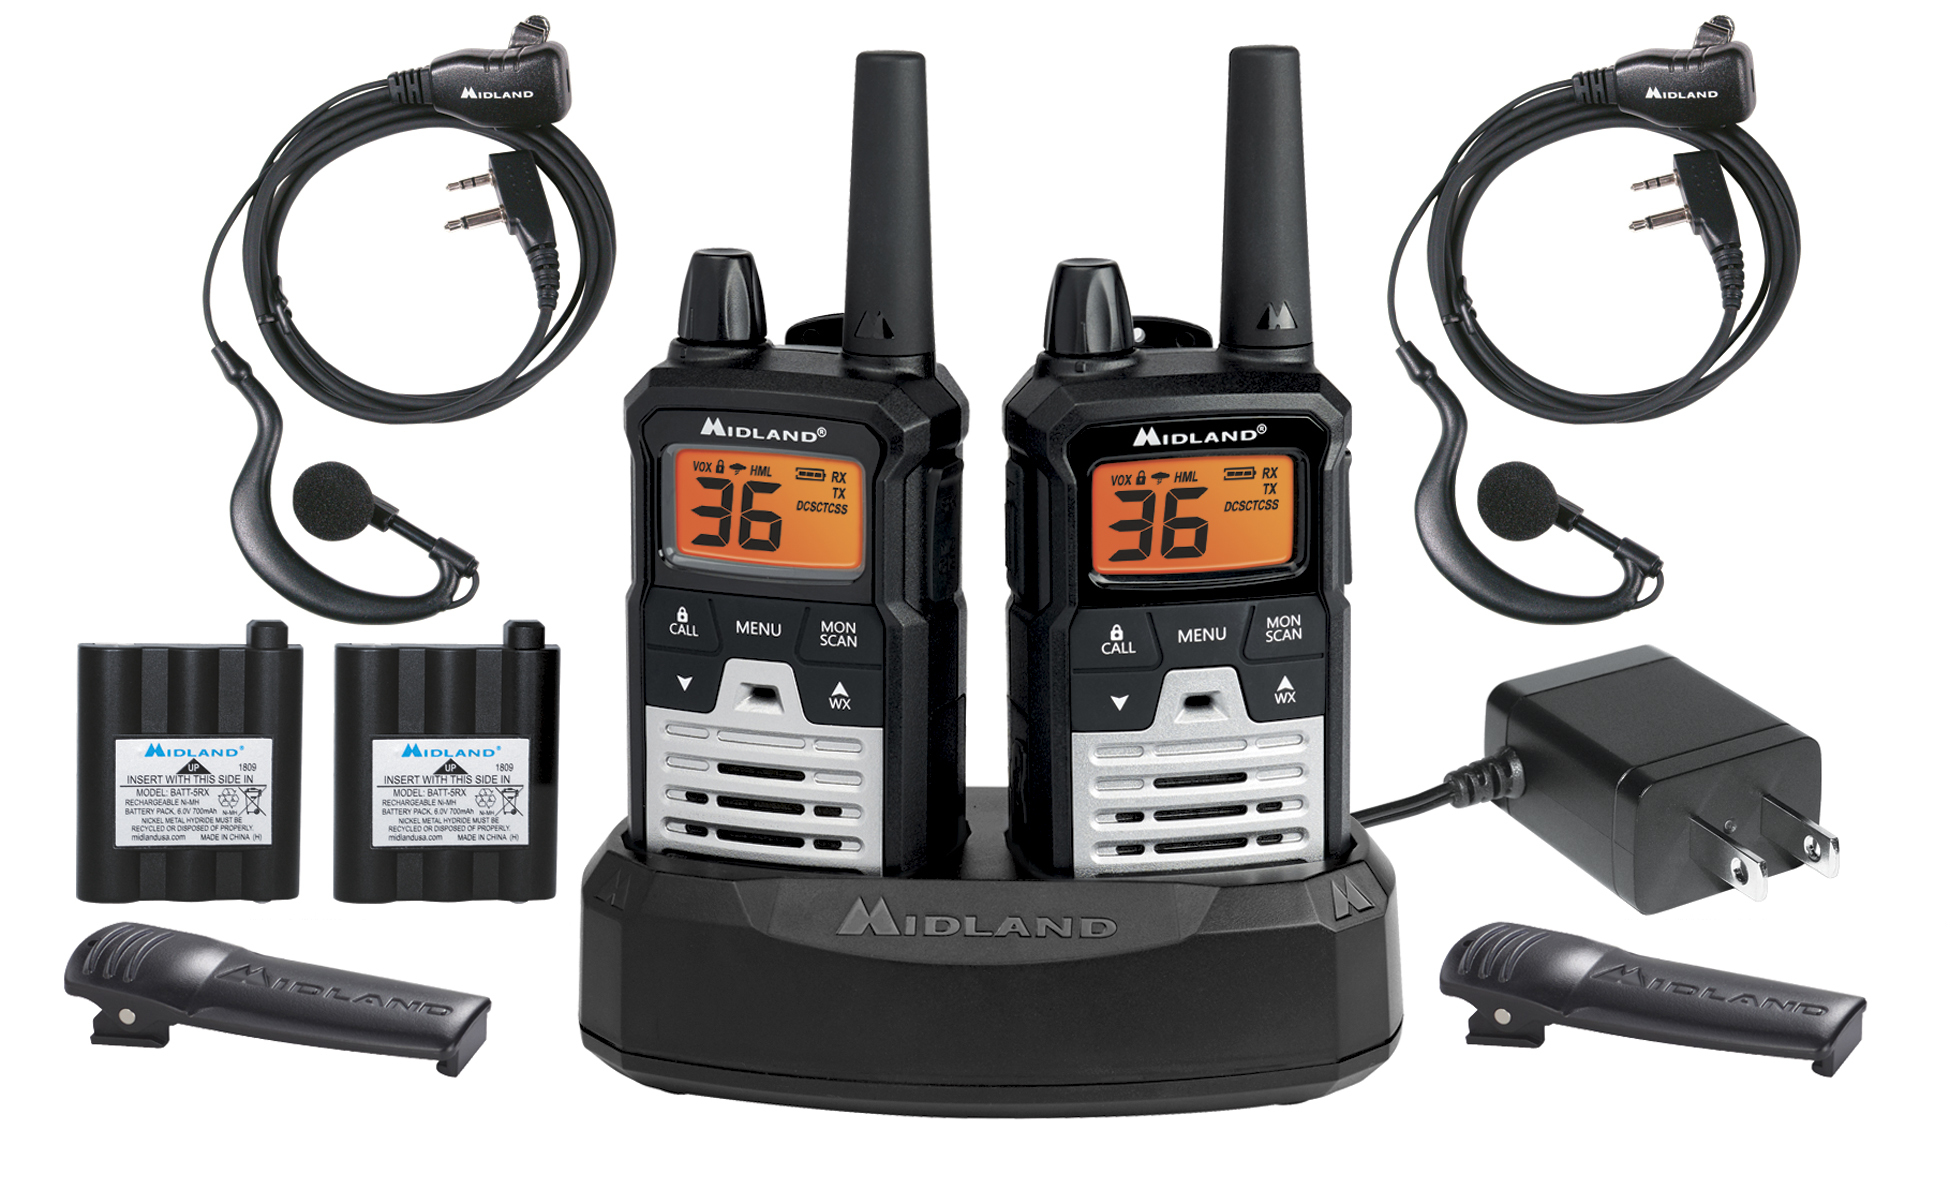 Midland T290VP4 2 -Way FRS/GMRS Radios, 40 - Mile 22 +14 CH, 121